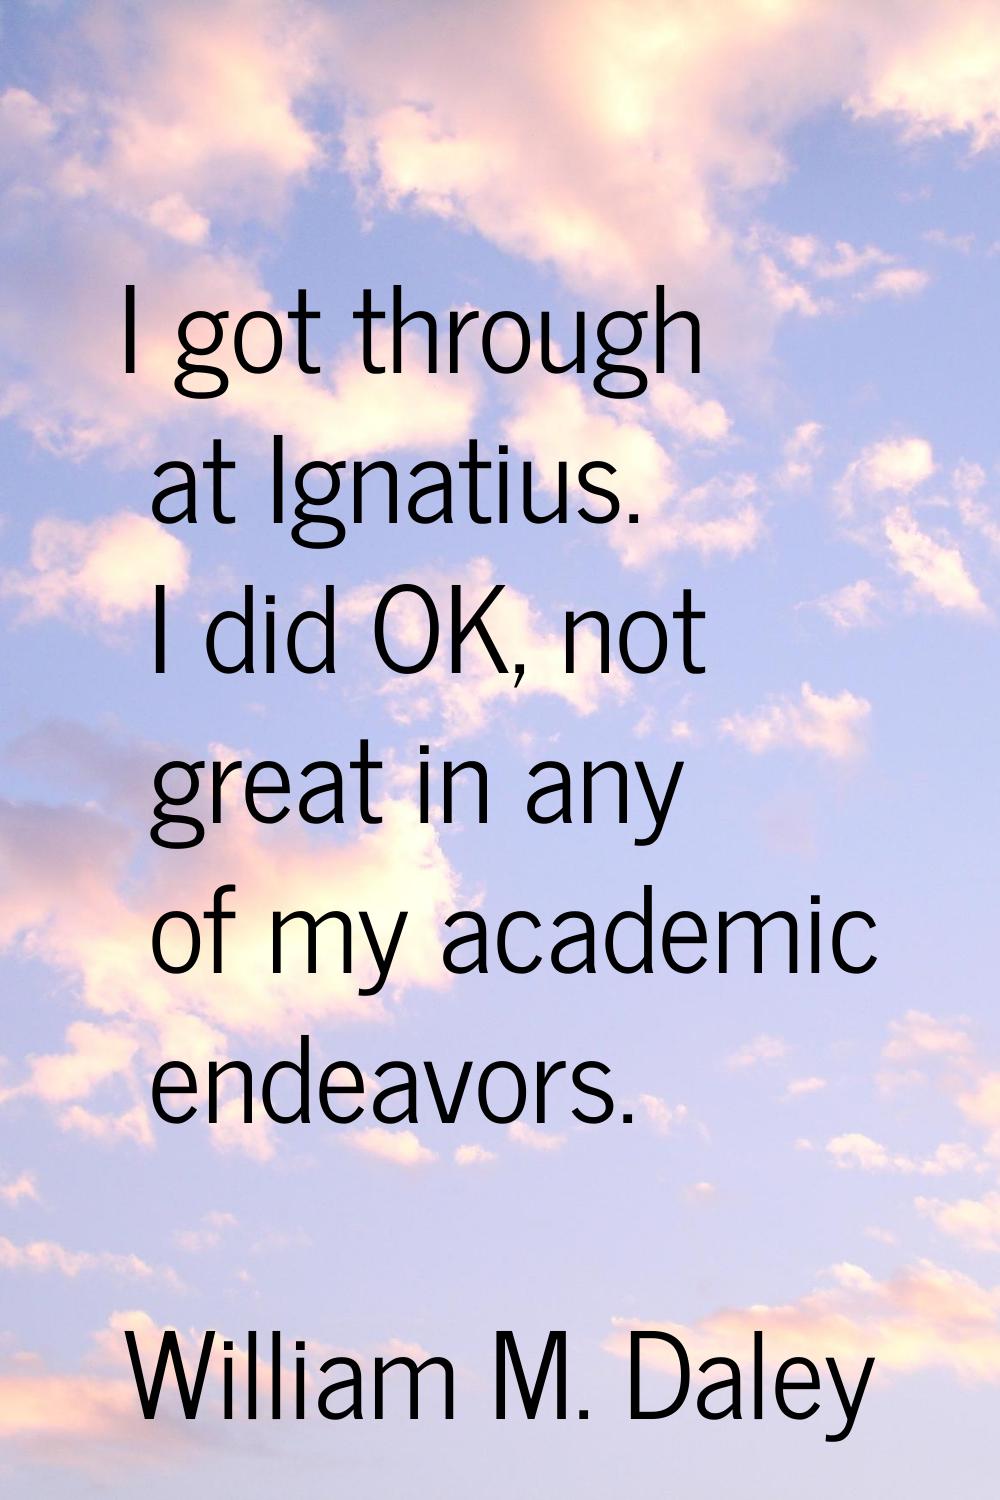 I got through at Ignatius. I did OK, not great in any of my academic endeavors.